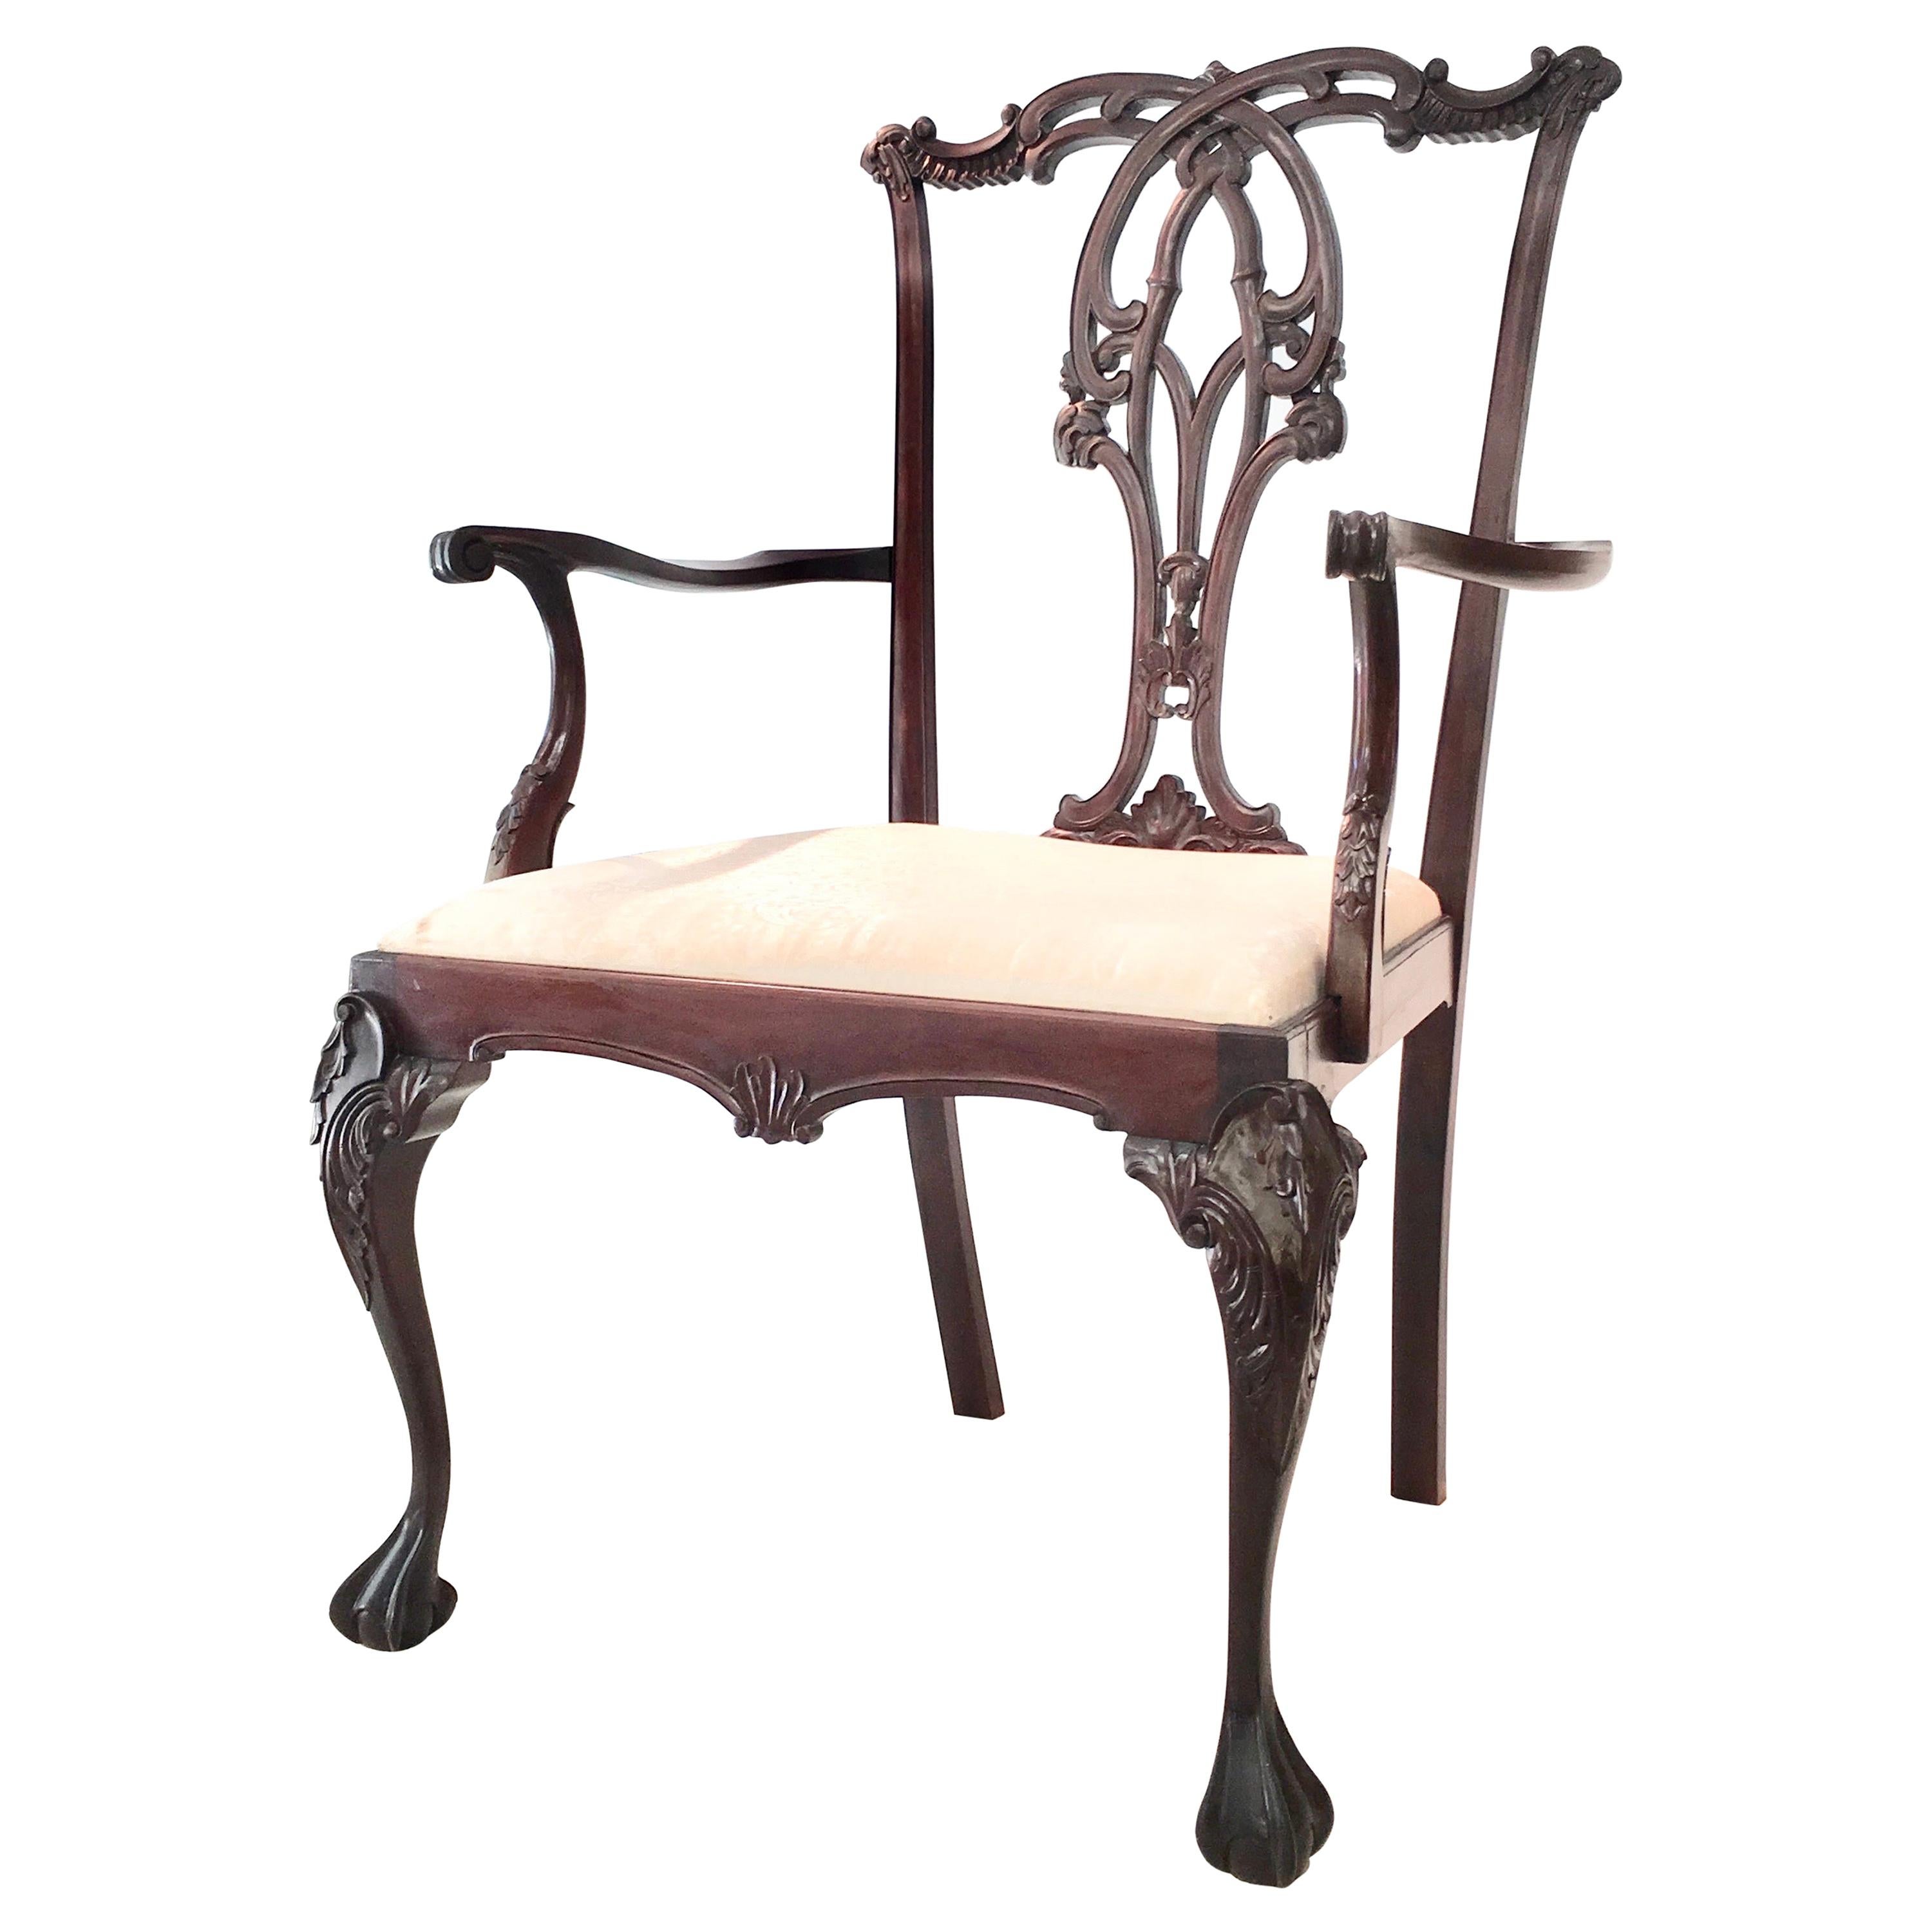 Novelty "World's Largest" Chippendale Chair For Sale